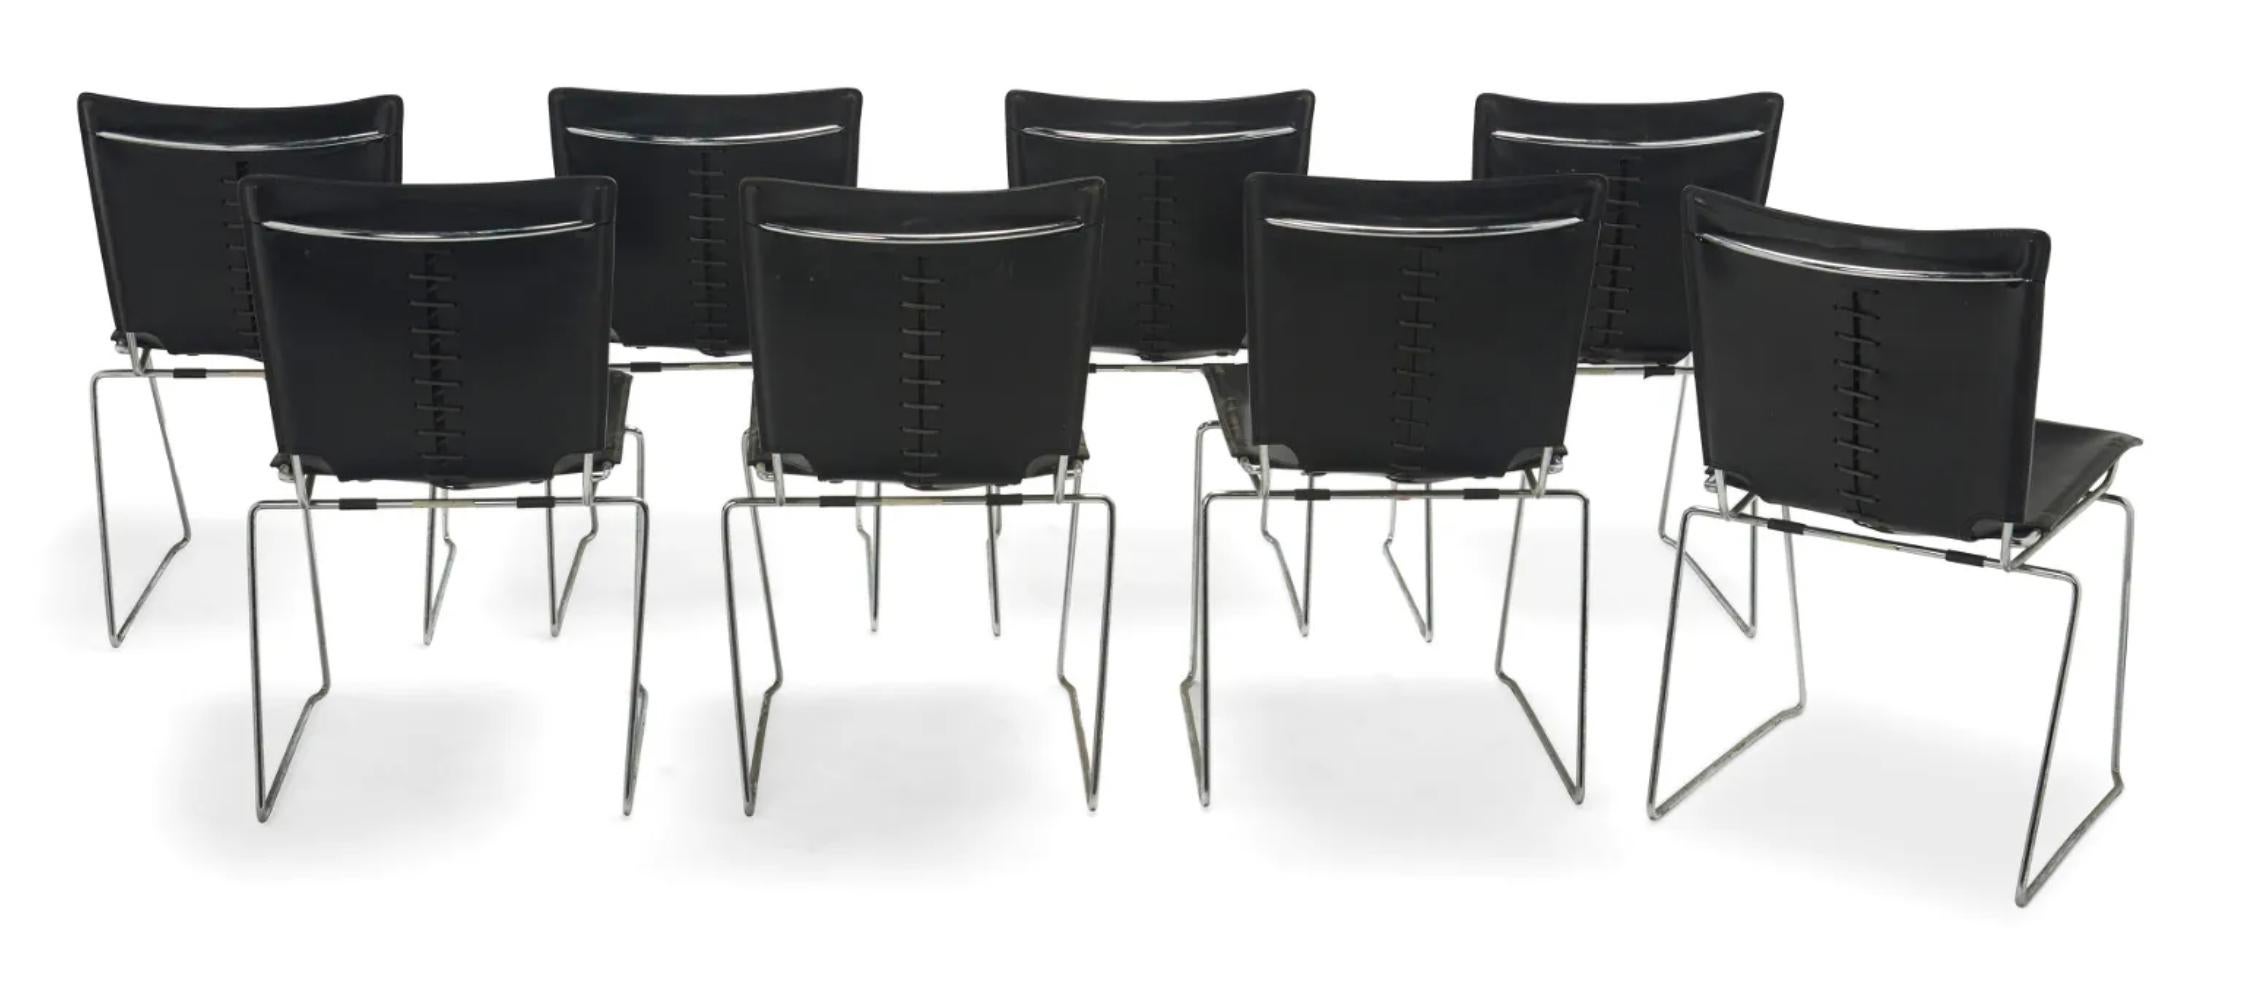 Incredible set of 8 stackable chairs by ICF (sold separately) . Designed by Toyoda Hiroyuki. Thick black leather covering a heavily chromed base. Wonderful details of stitched and laced leather. These can easily be stacked in groups of 4-5 . Perfect